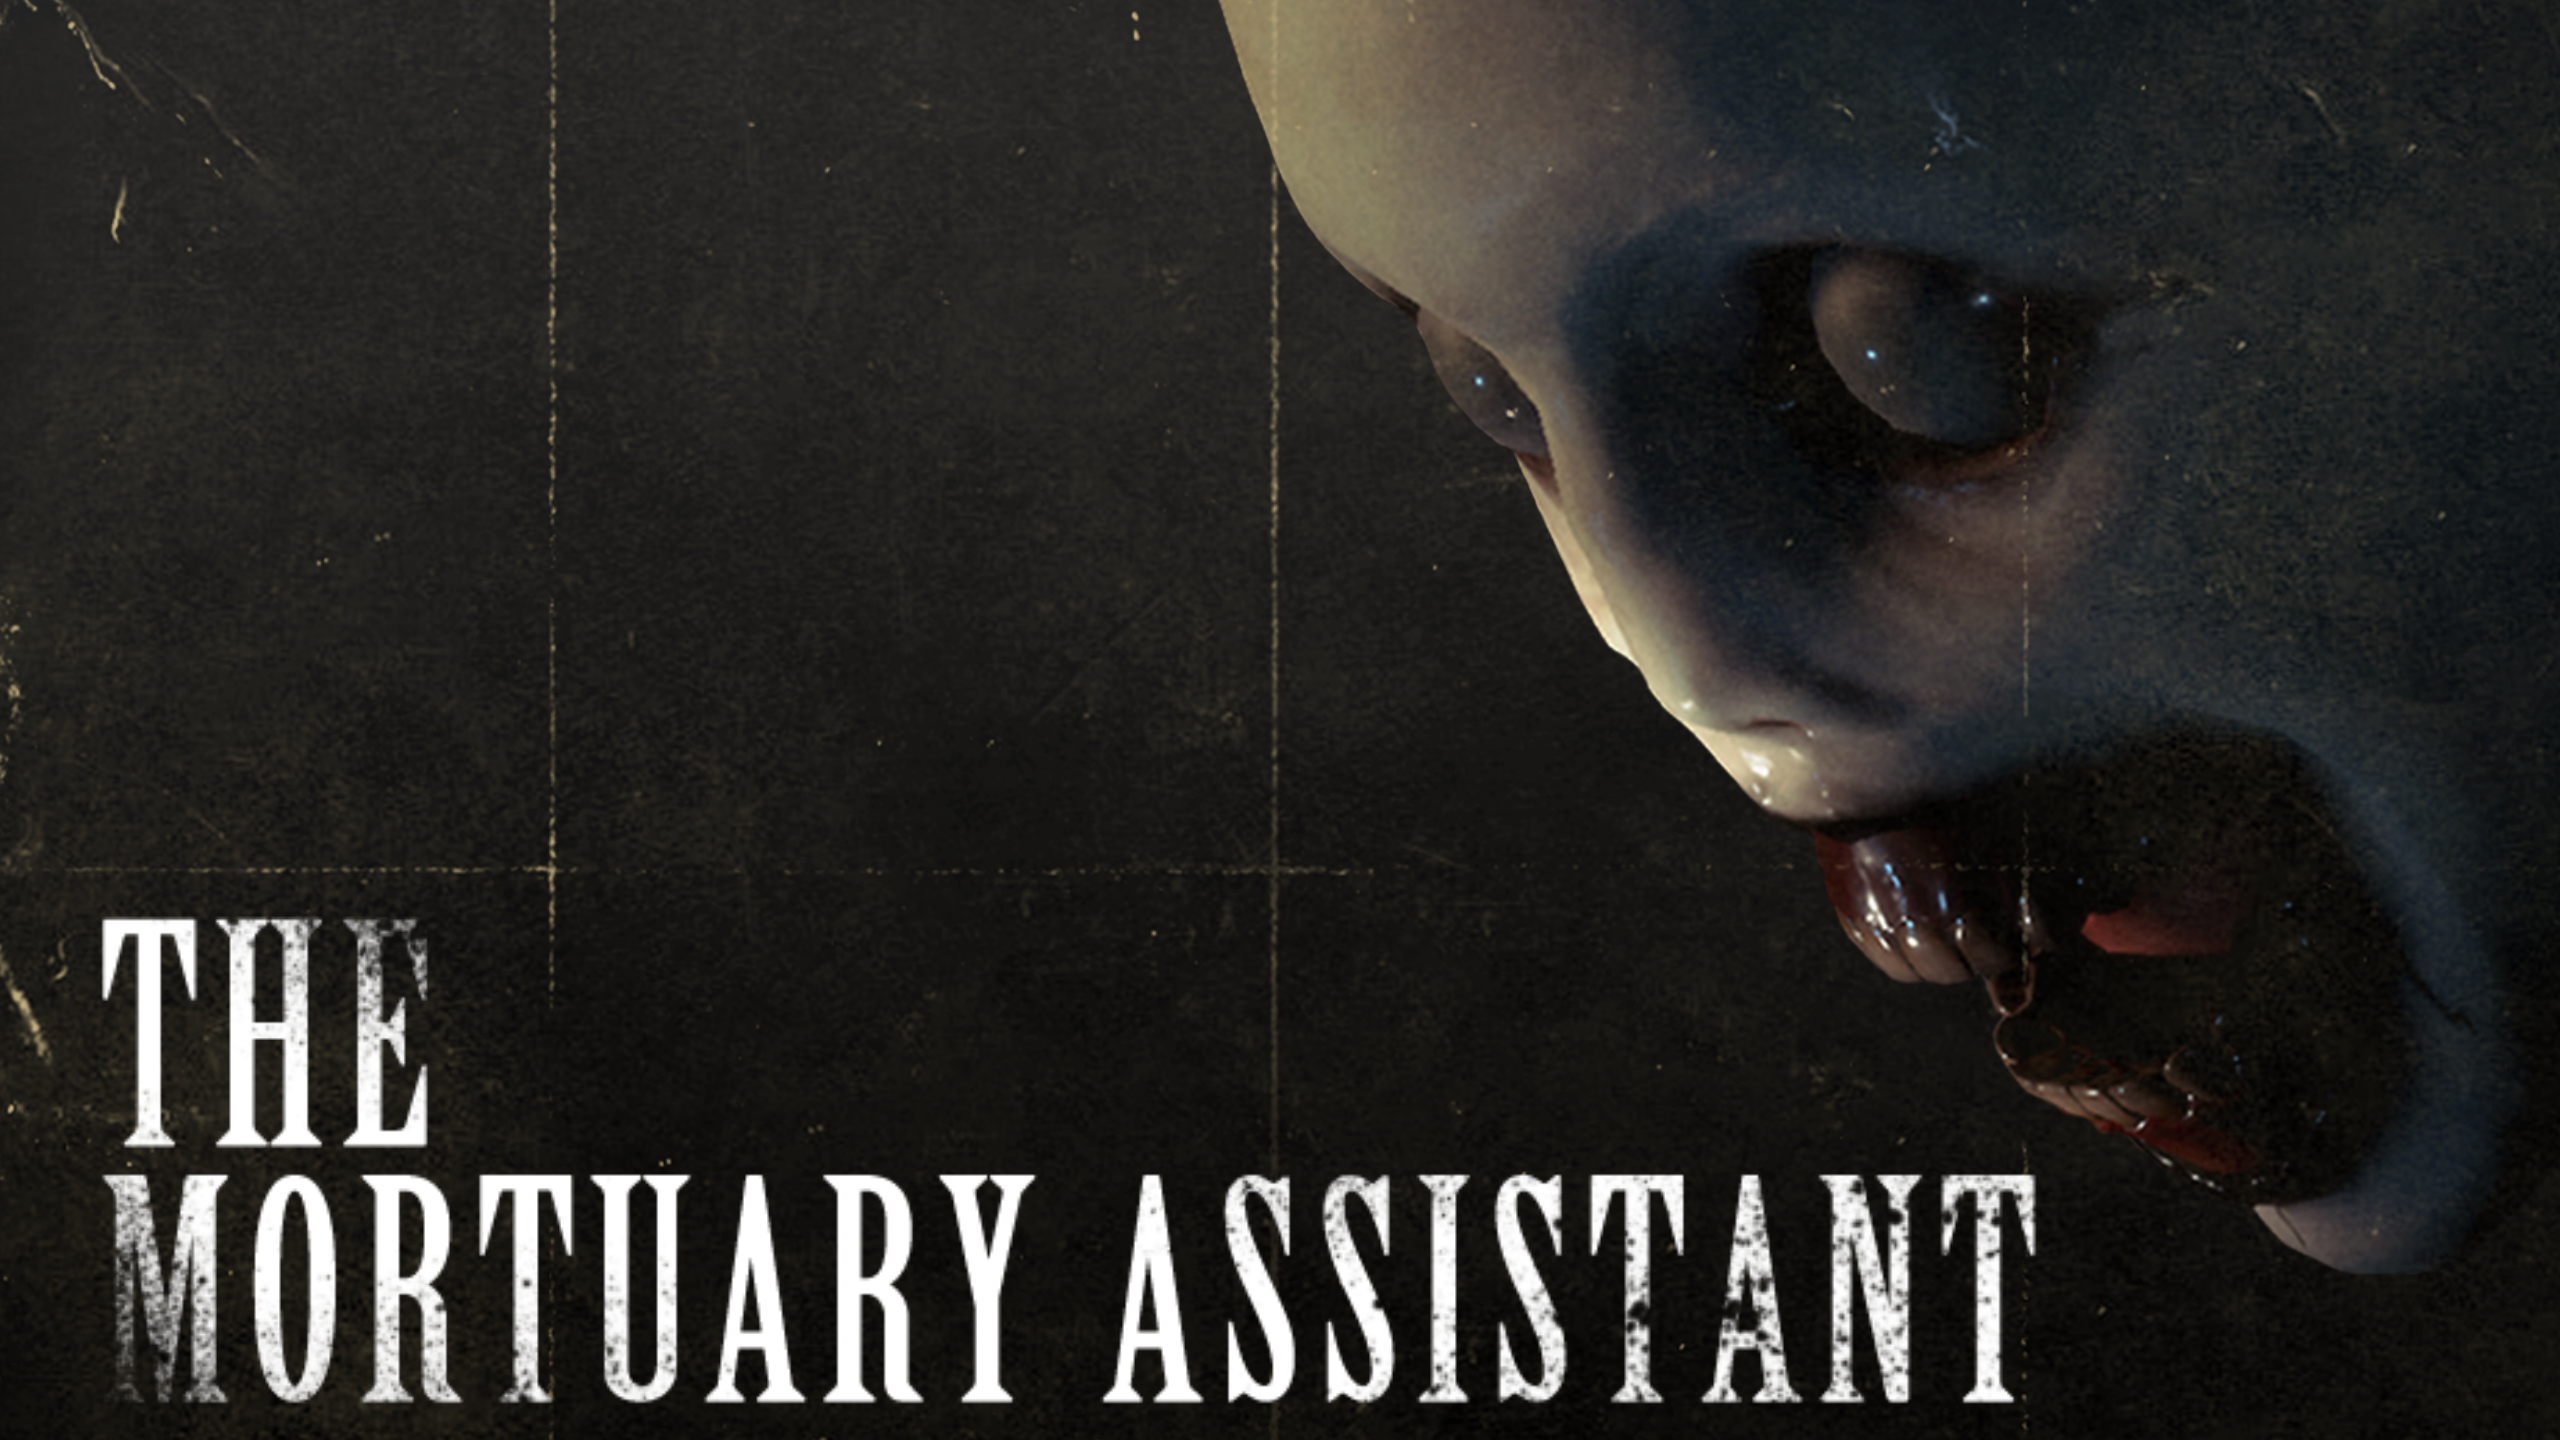 mortuary assistant